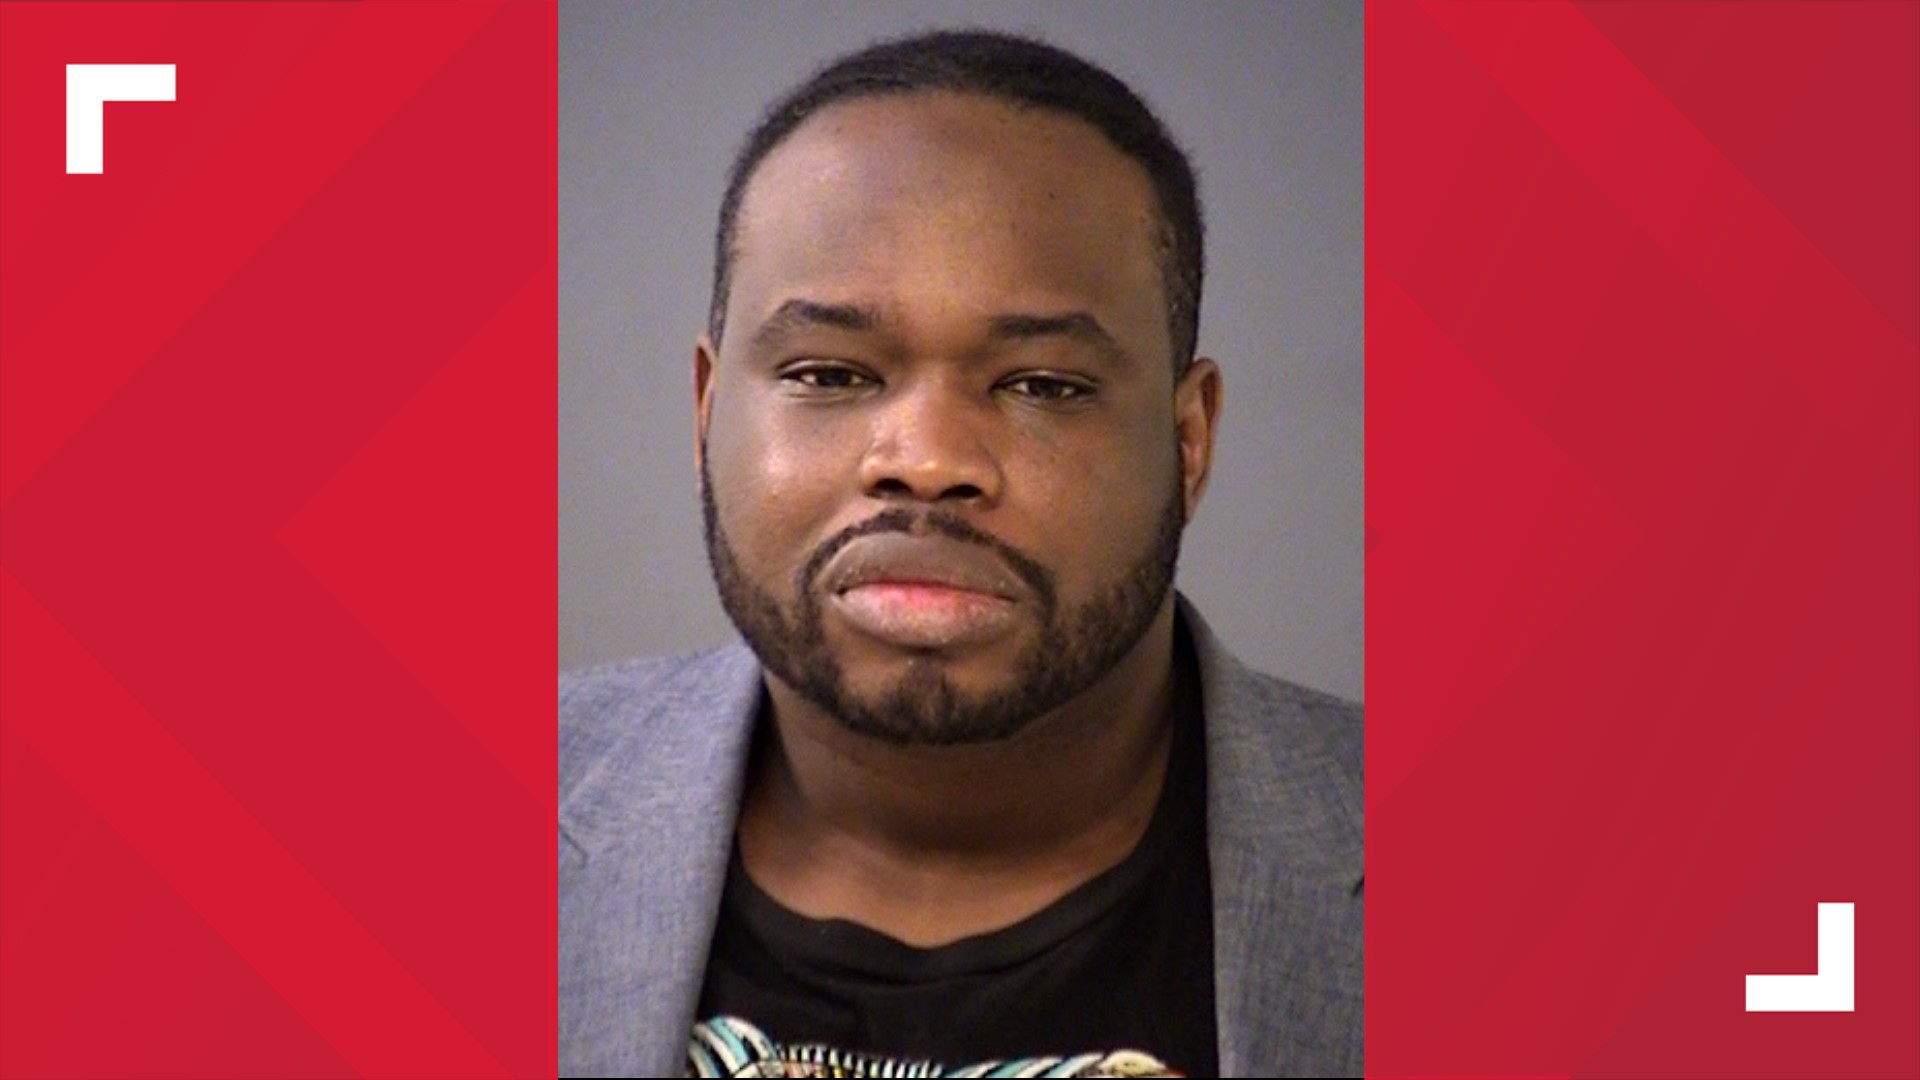 Vauhxx Booker, a man at the center of an alleged hate crime in Monroe County, has been accused of pushing an IMPD officer.